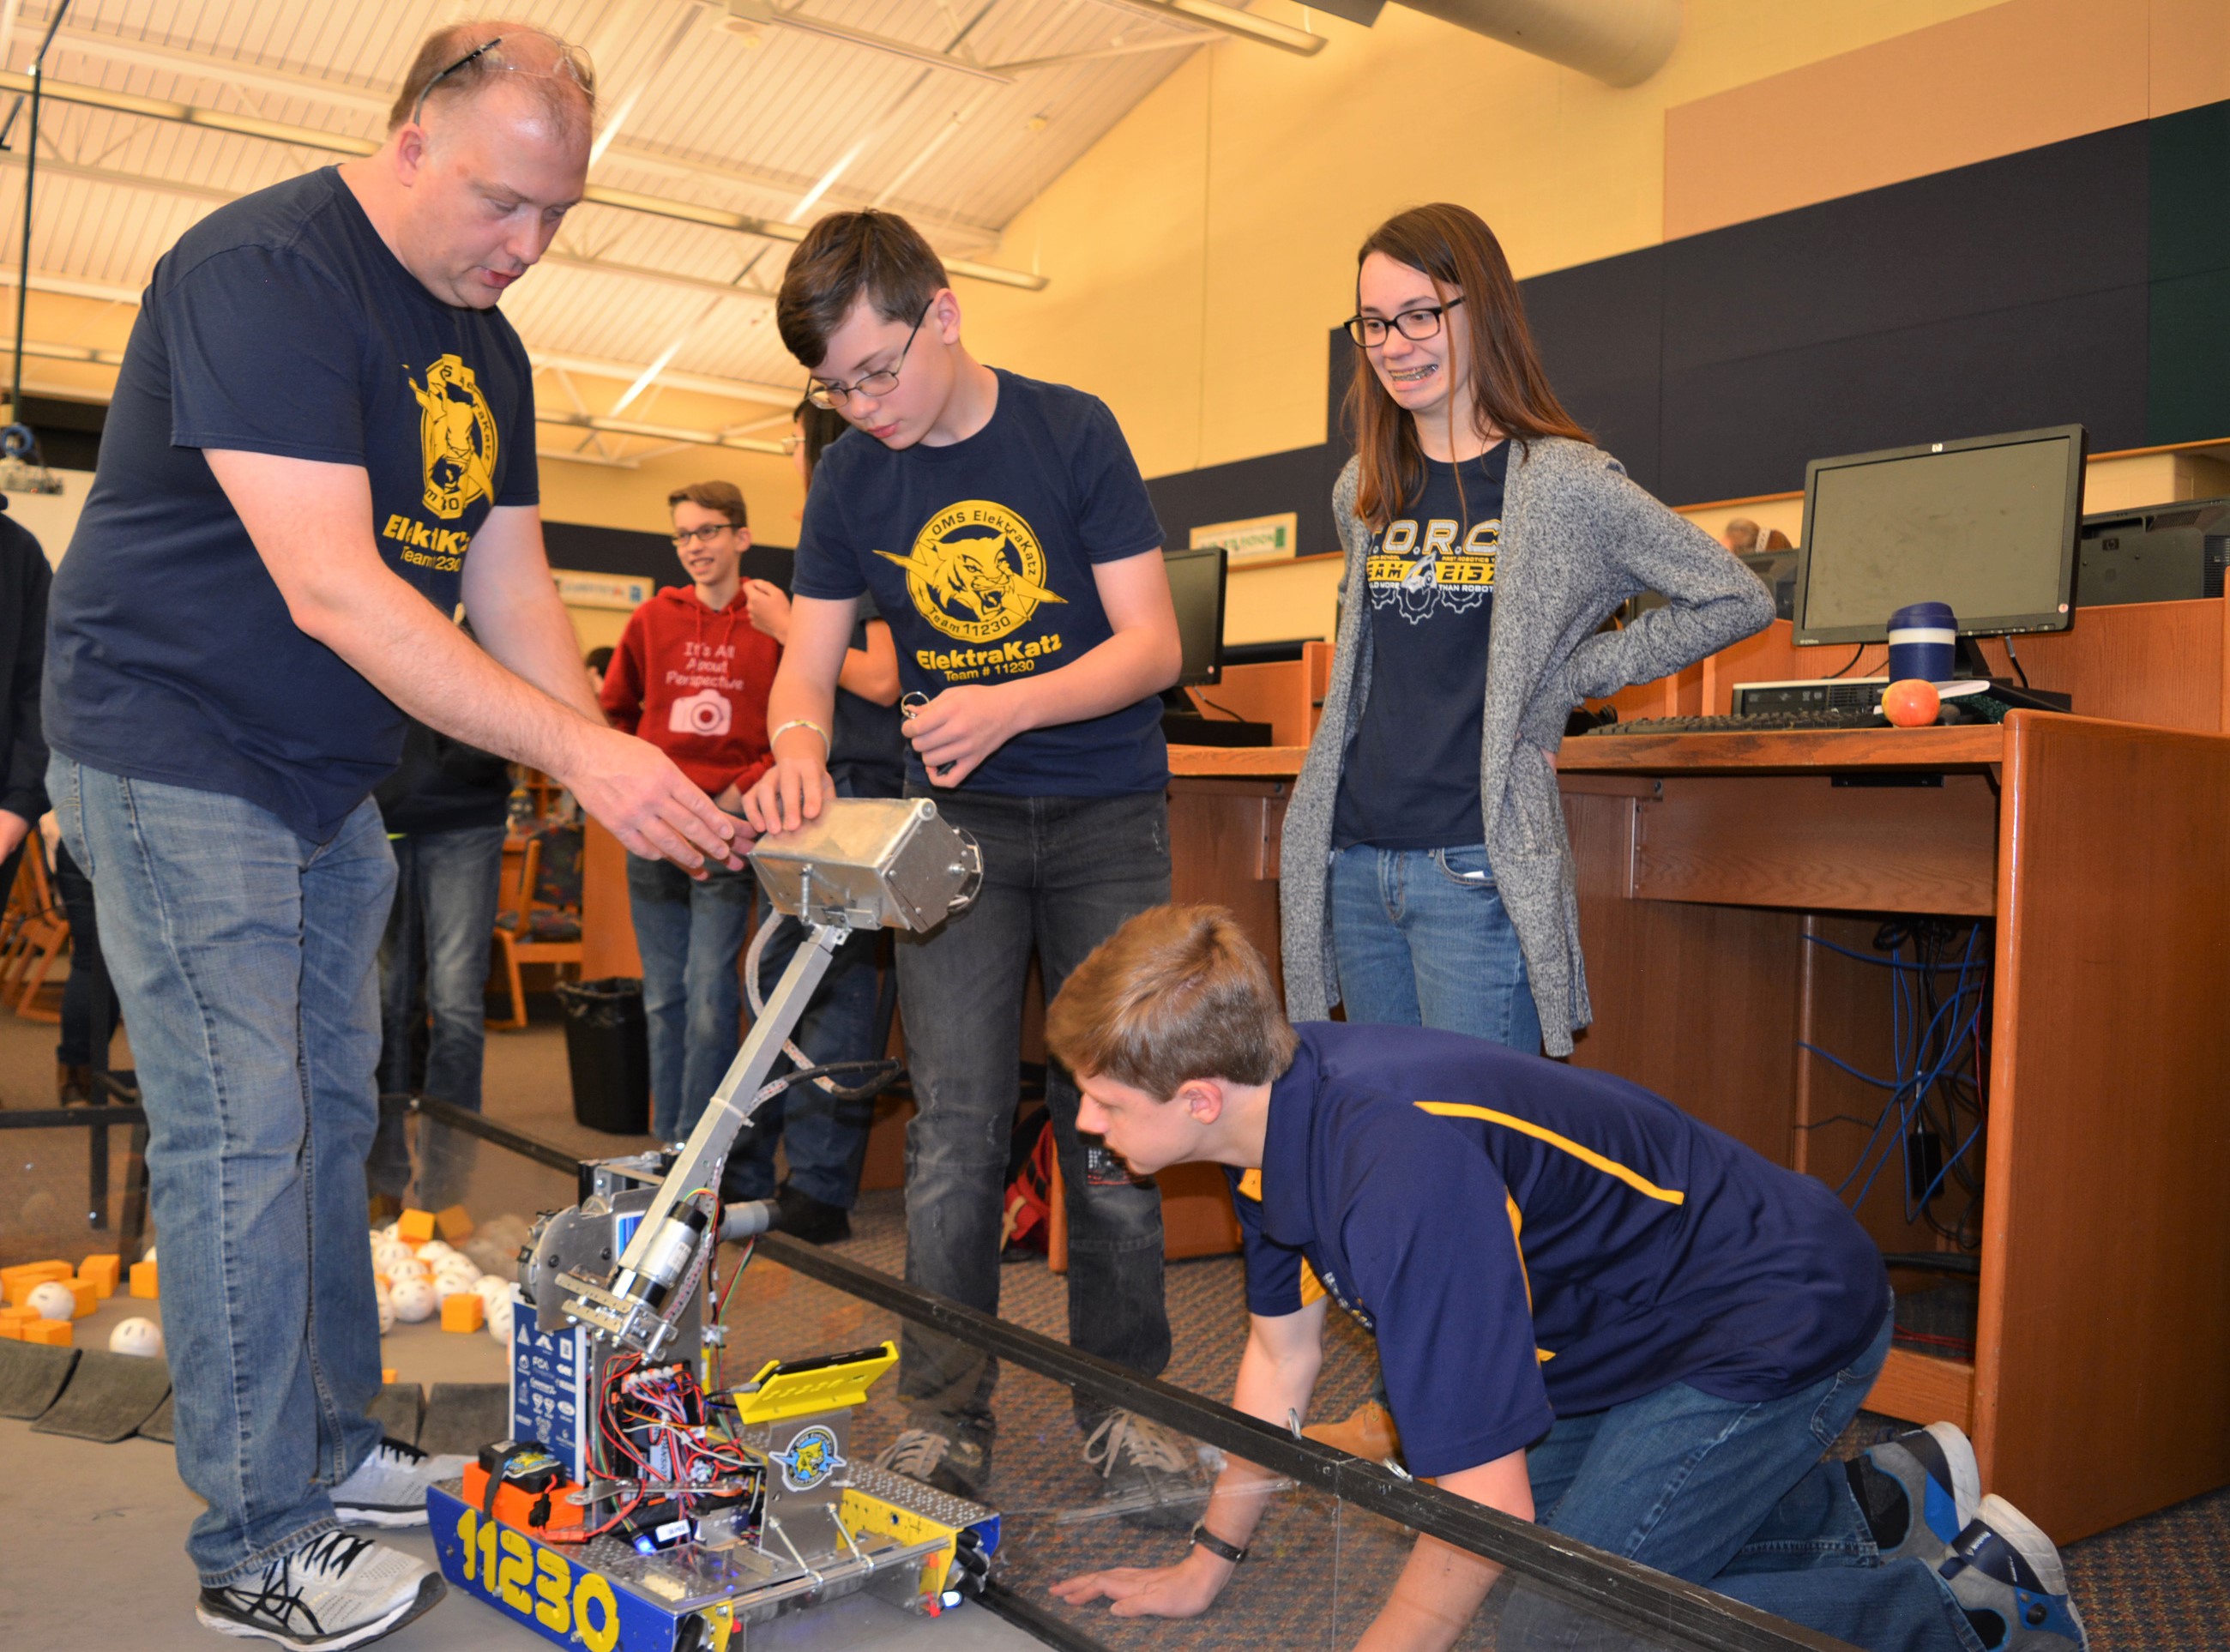 (From left) OMS robotics mentor Dennis Hurst and student Gavin Shafer make some adjustments with assistance from OHS robotics students Keira Houston and Jason Grabowski. Photo by C.J. Carnacchio.